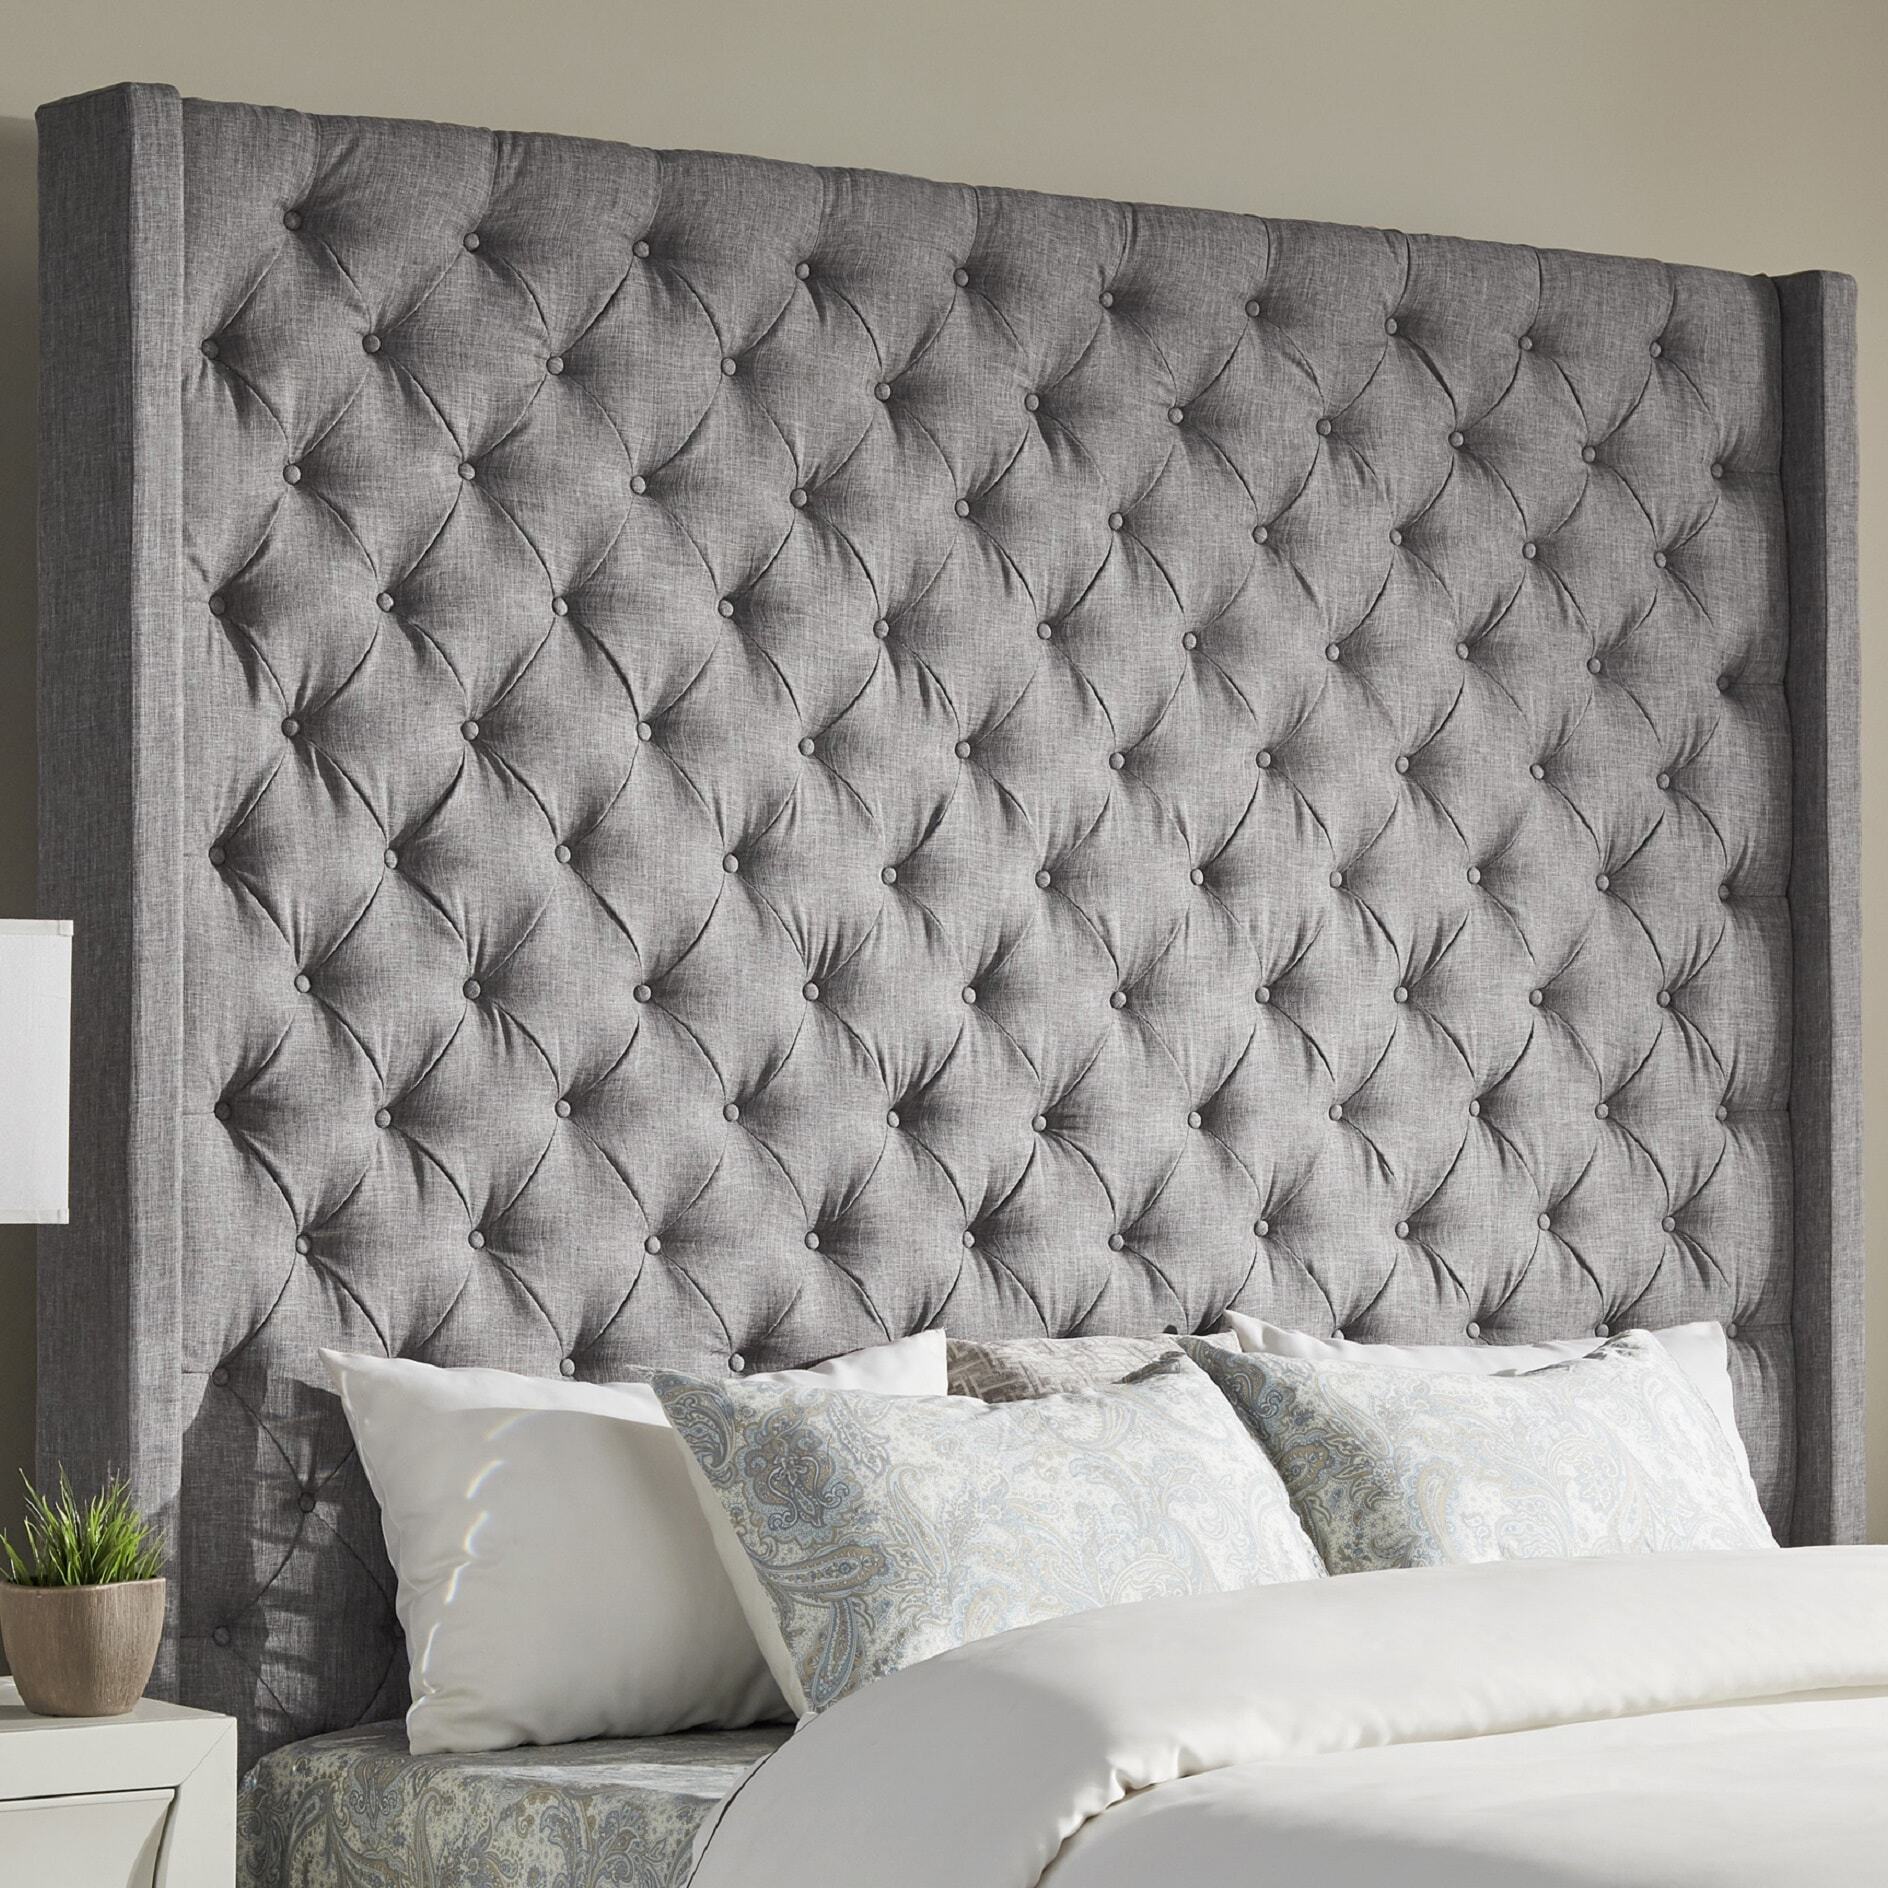 Extra tall headboards for king beds